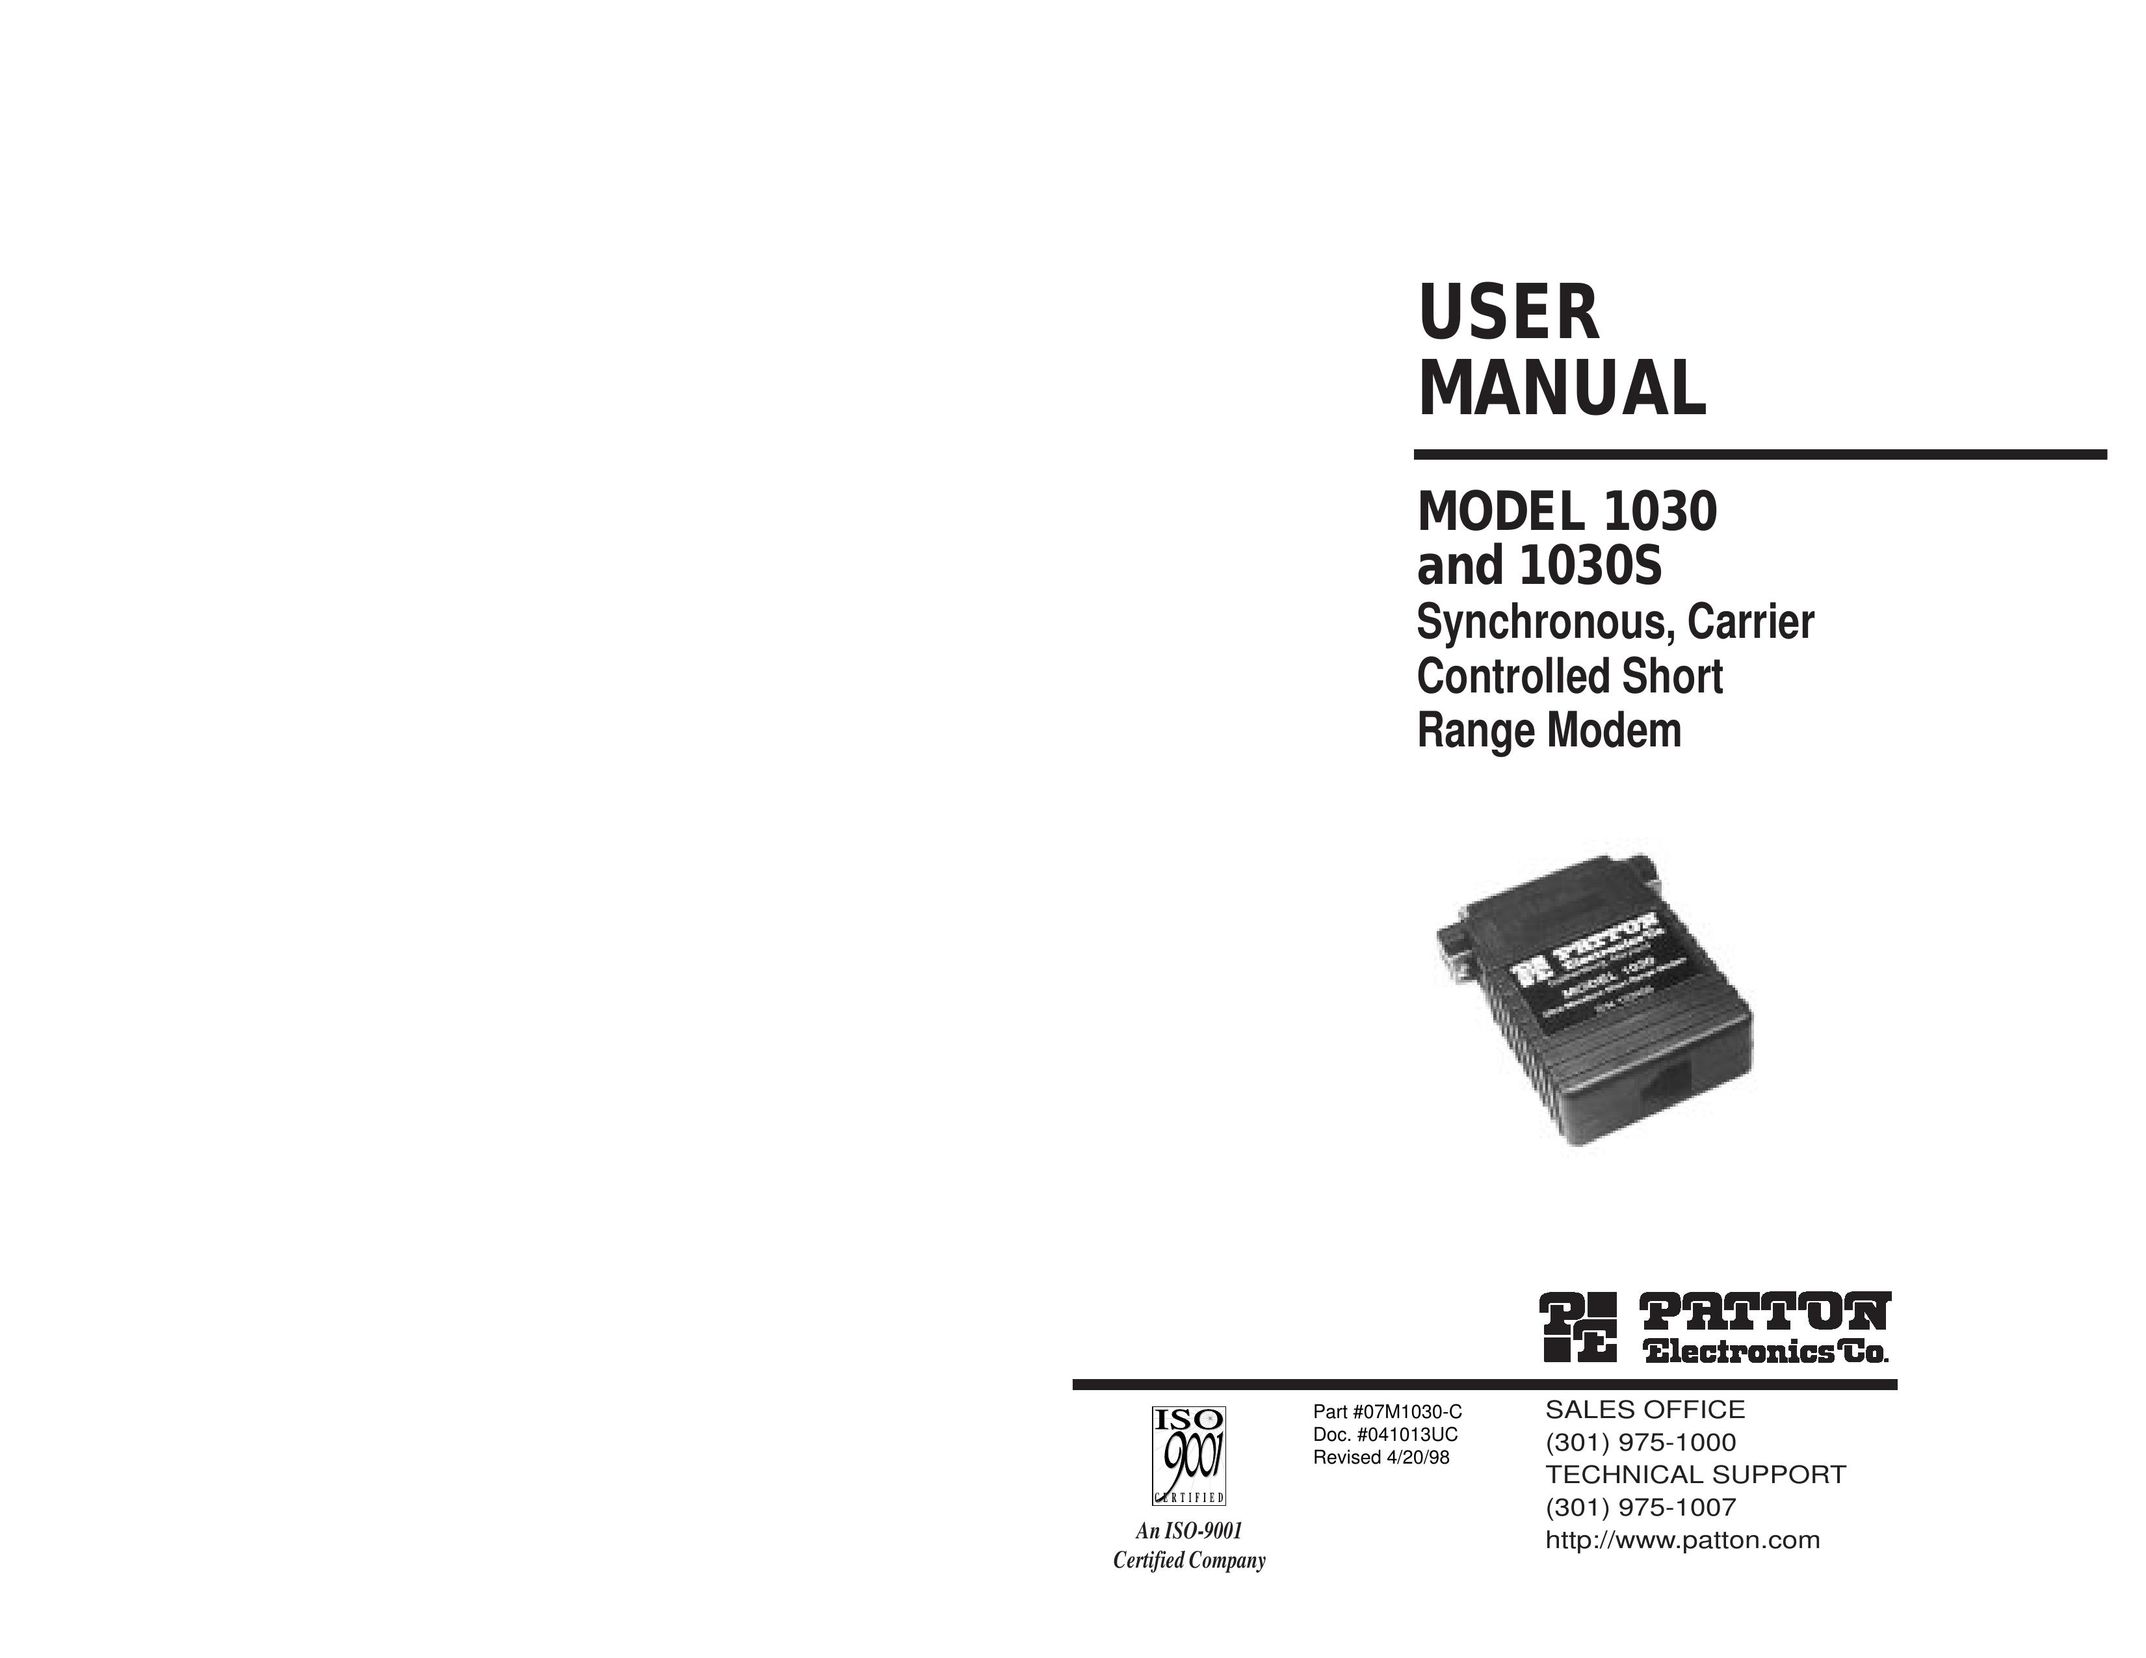 Patton electronic 1030 Model Vehicle User Manual (Page 1)